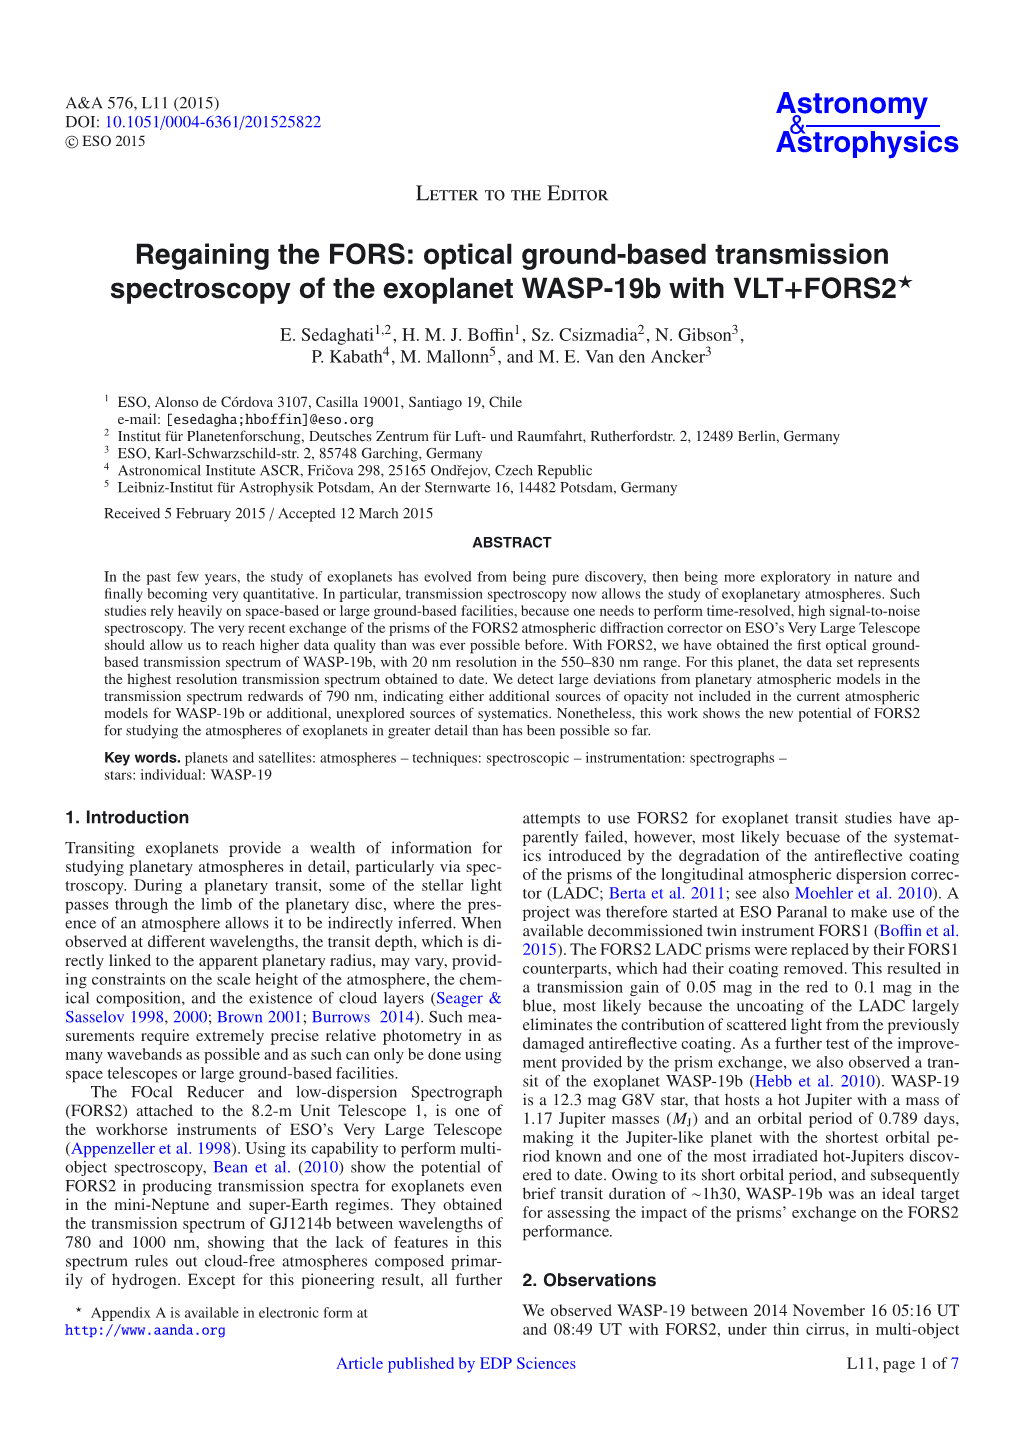 Regaining the FORS: Optical Ground-Based Transmission Spectroscopy of the Exoplanet WASP-19B with VLT+FORS2